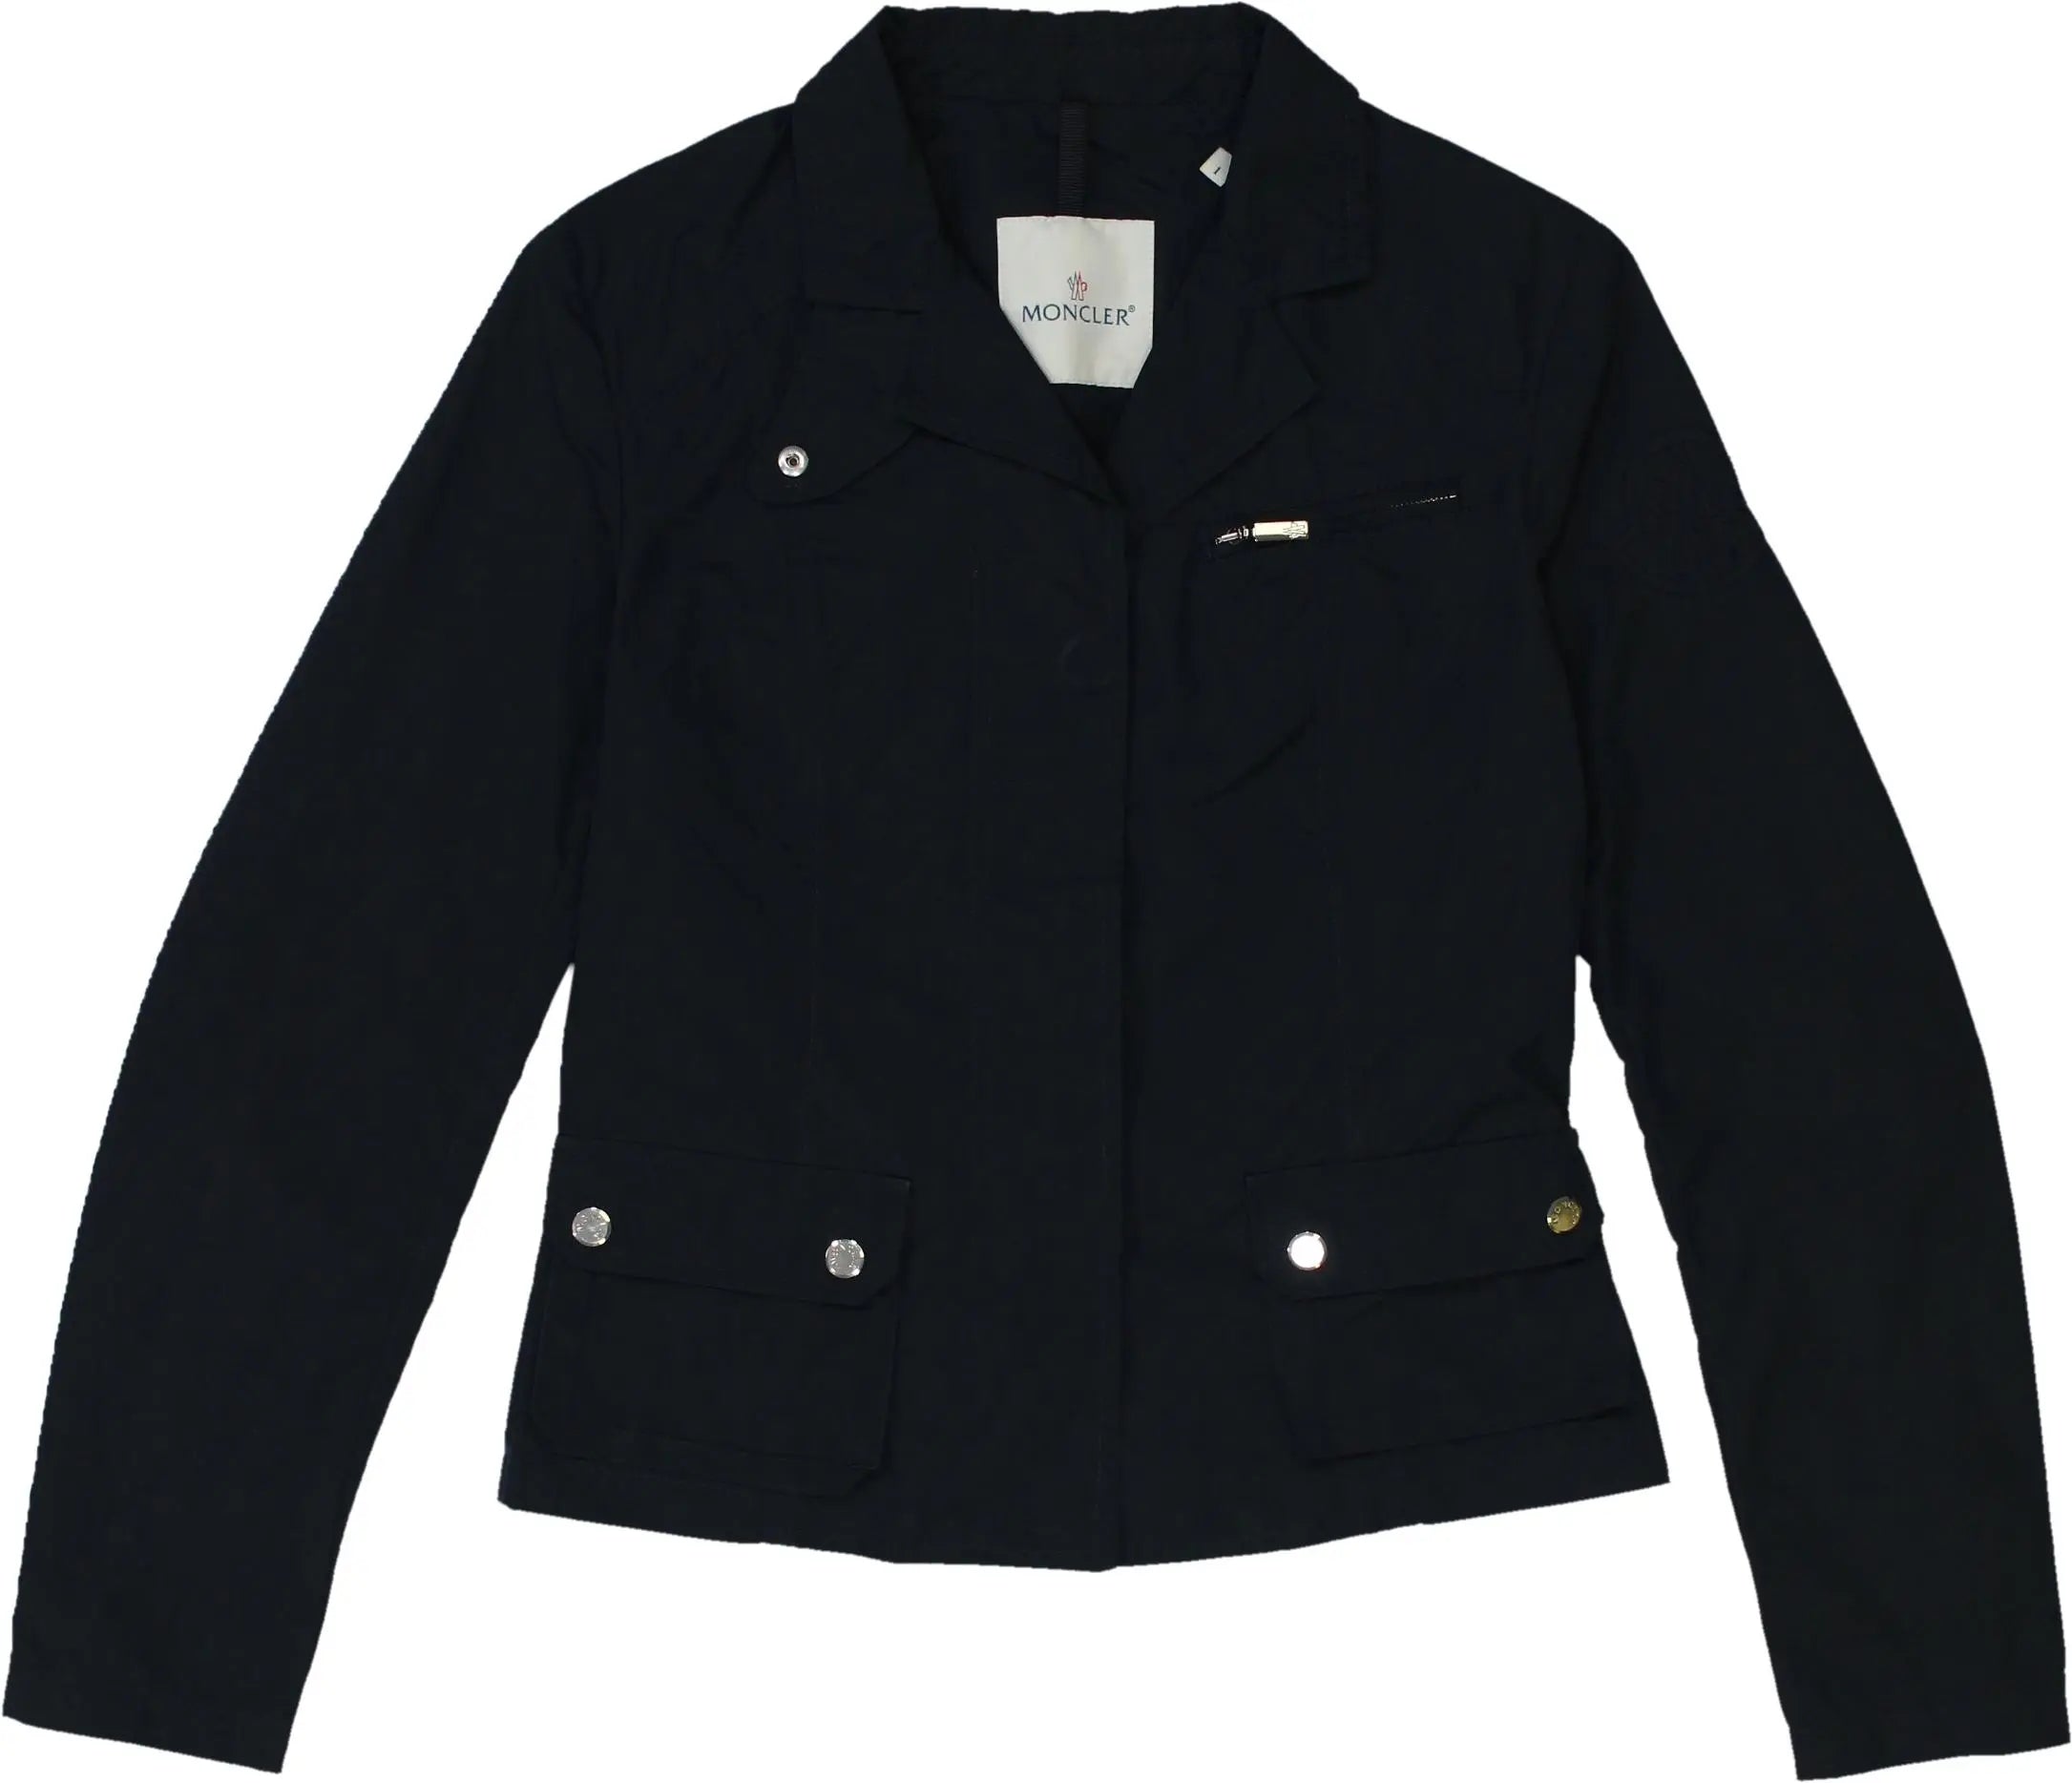 Moncler - Black Jacket by Moncler- ThriftTale.com - Vintage and second handclothing